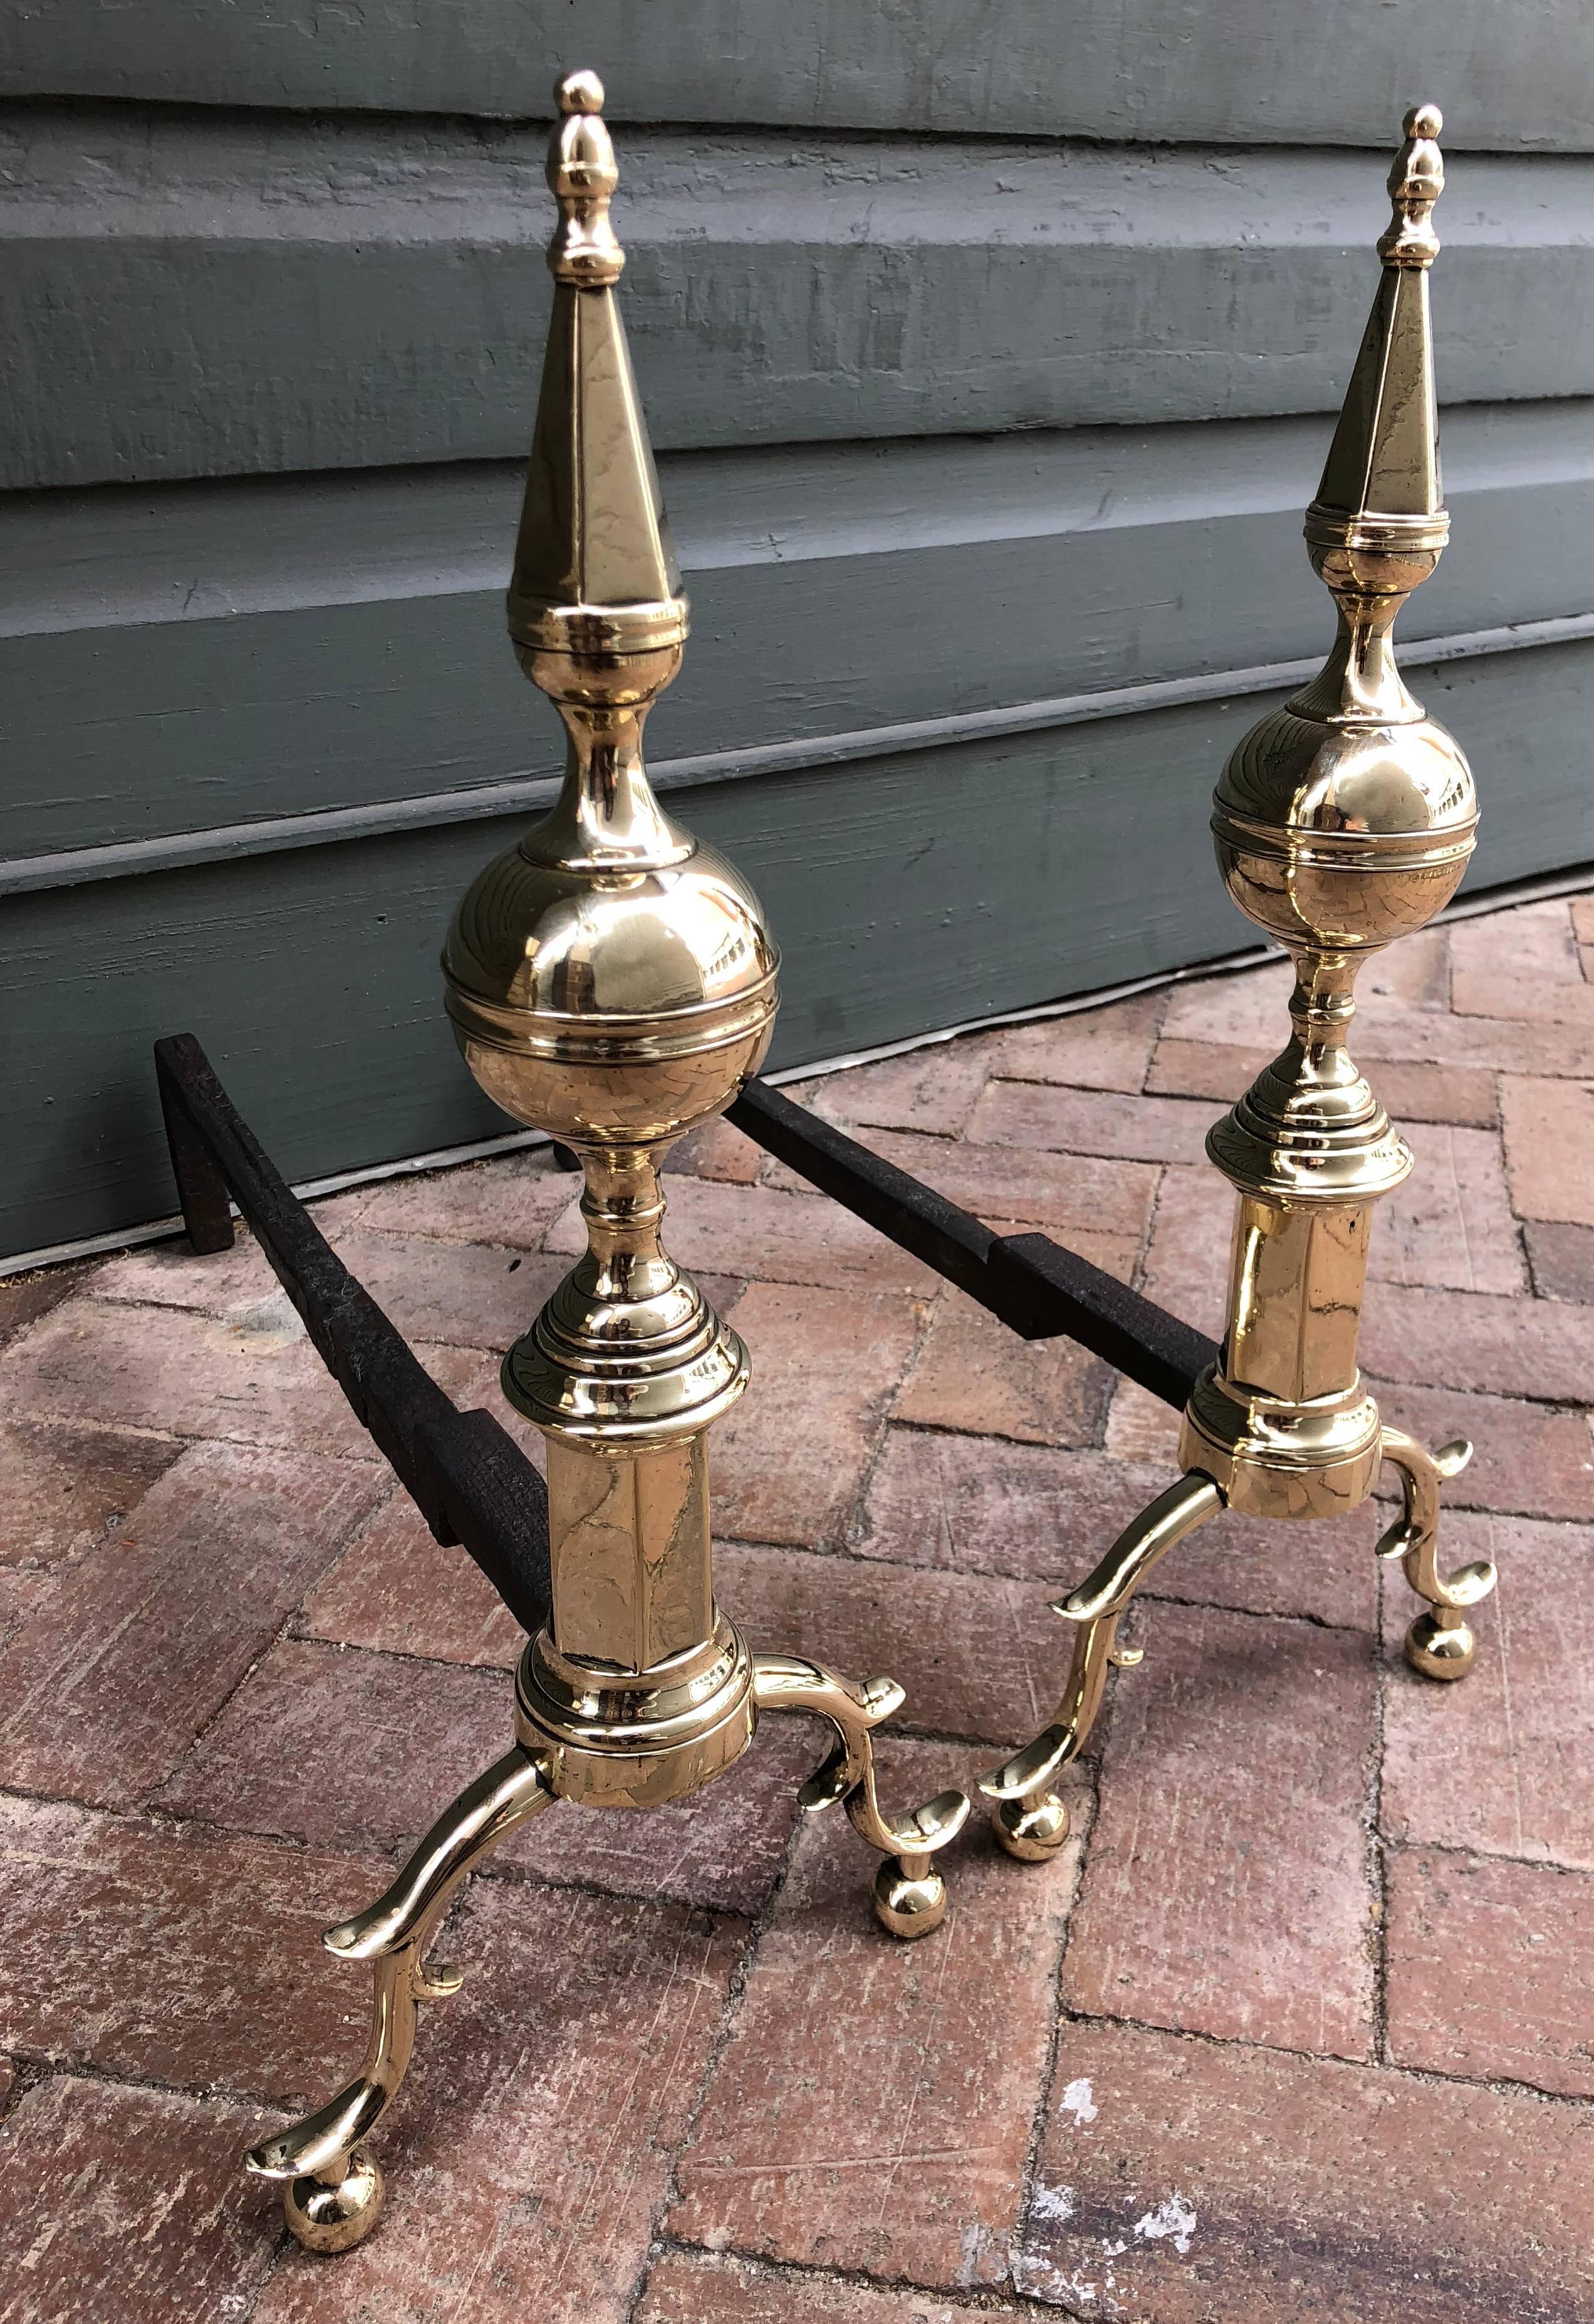 Late 18th century American New York steeple top andirons with S-scrolled legs and spurs ending in ball feet. The body is brass with hand-wrought iron shaft.